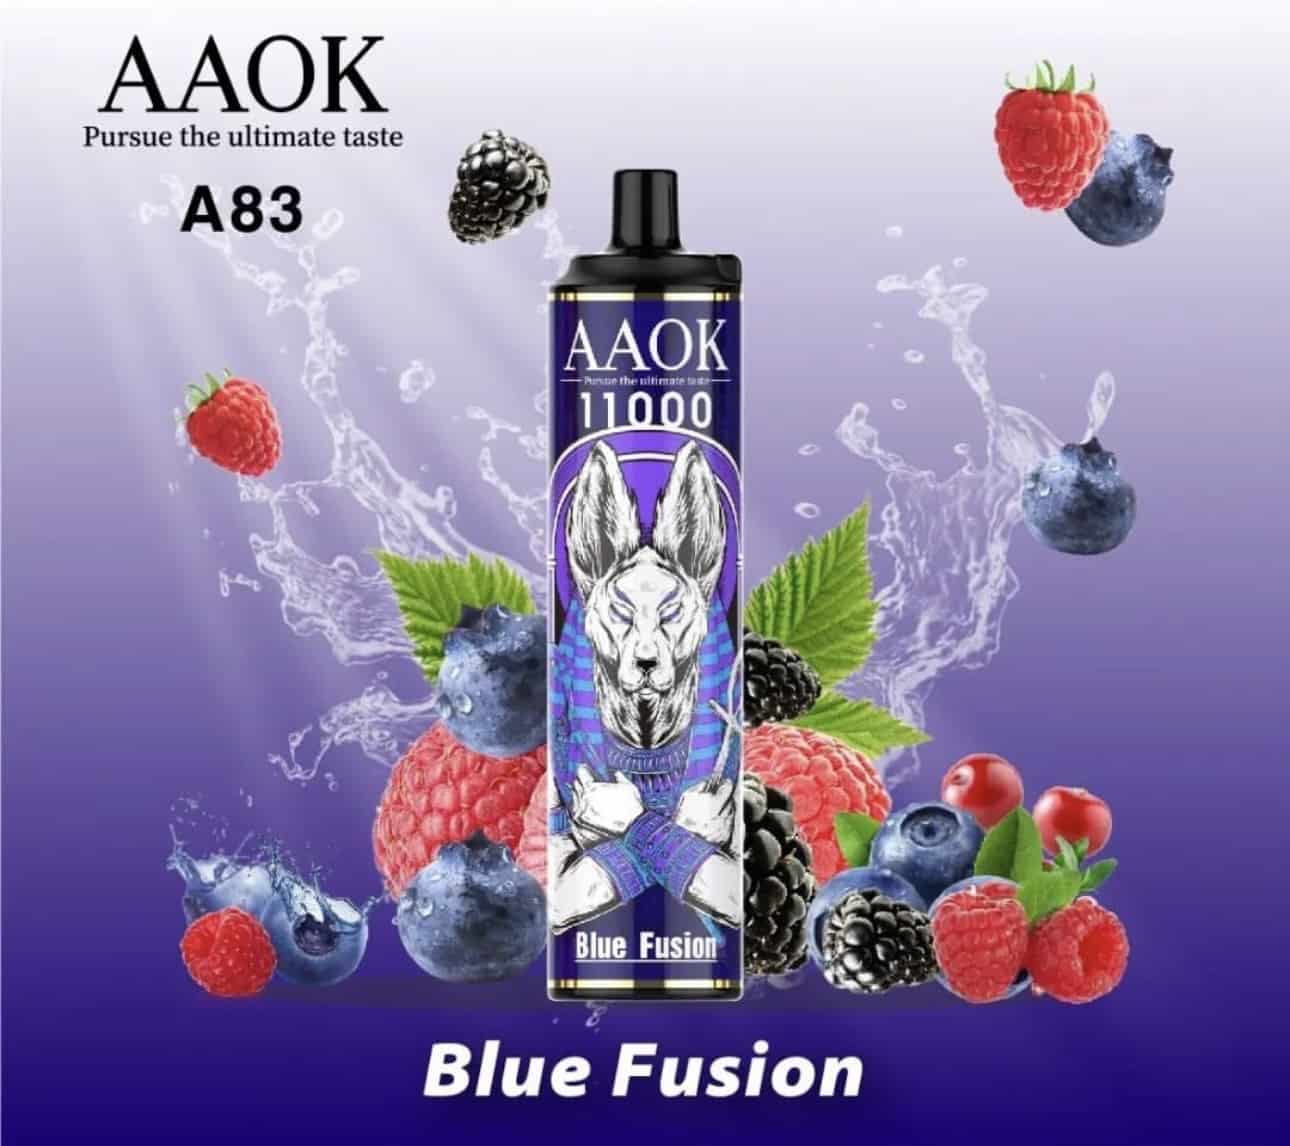 AAOK A83 Blue Fusion (11000 Puffs)